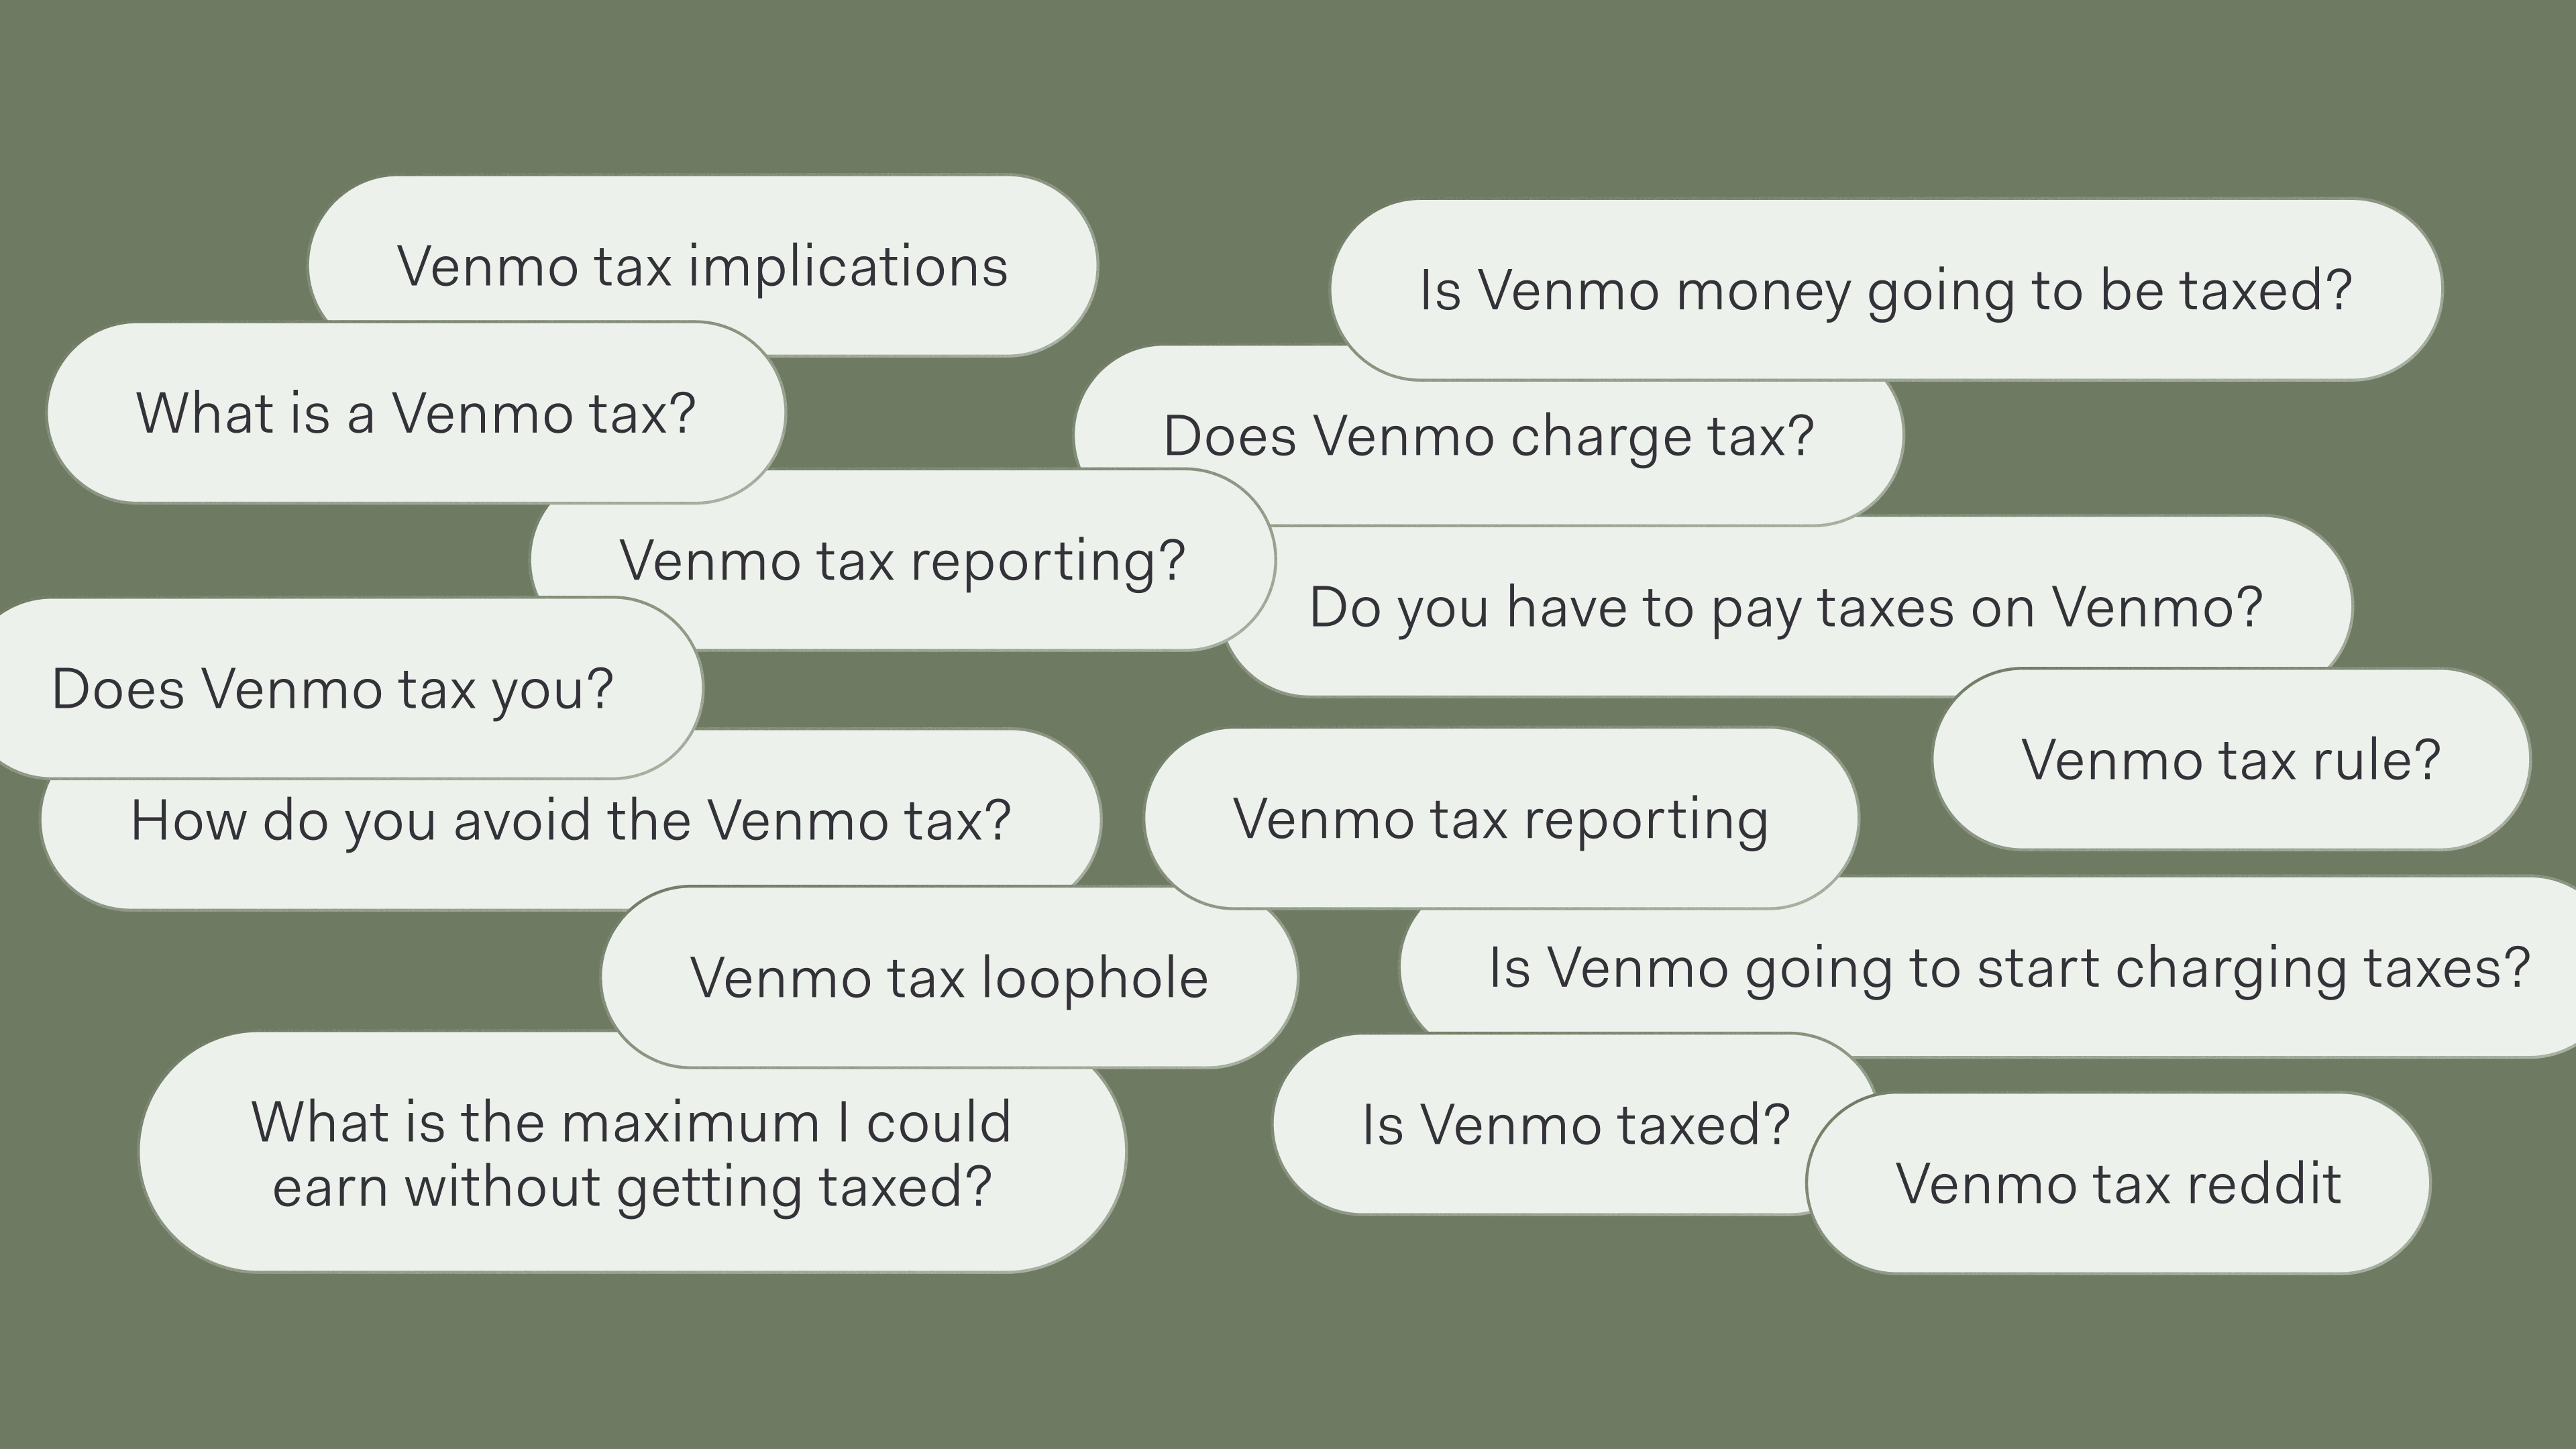 Frequently asked questions about the IRS Venmo Tax